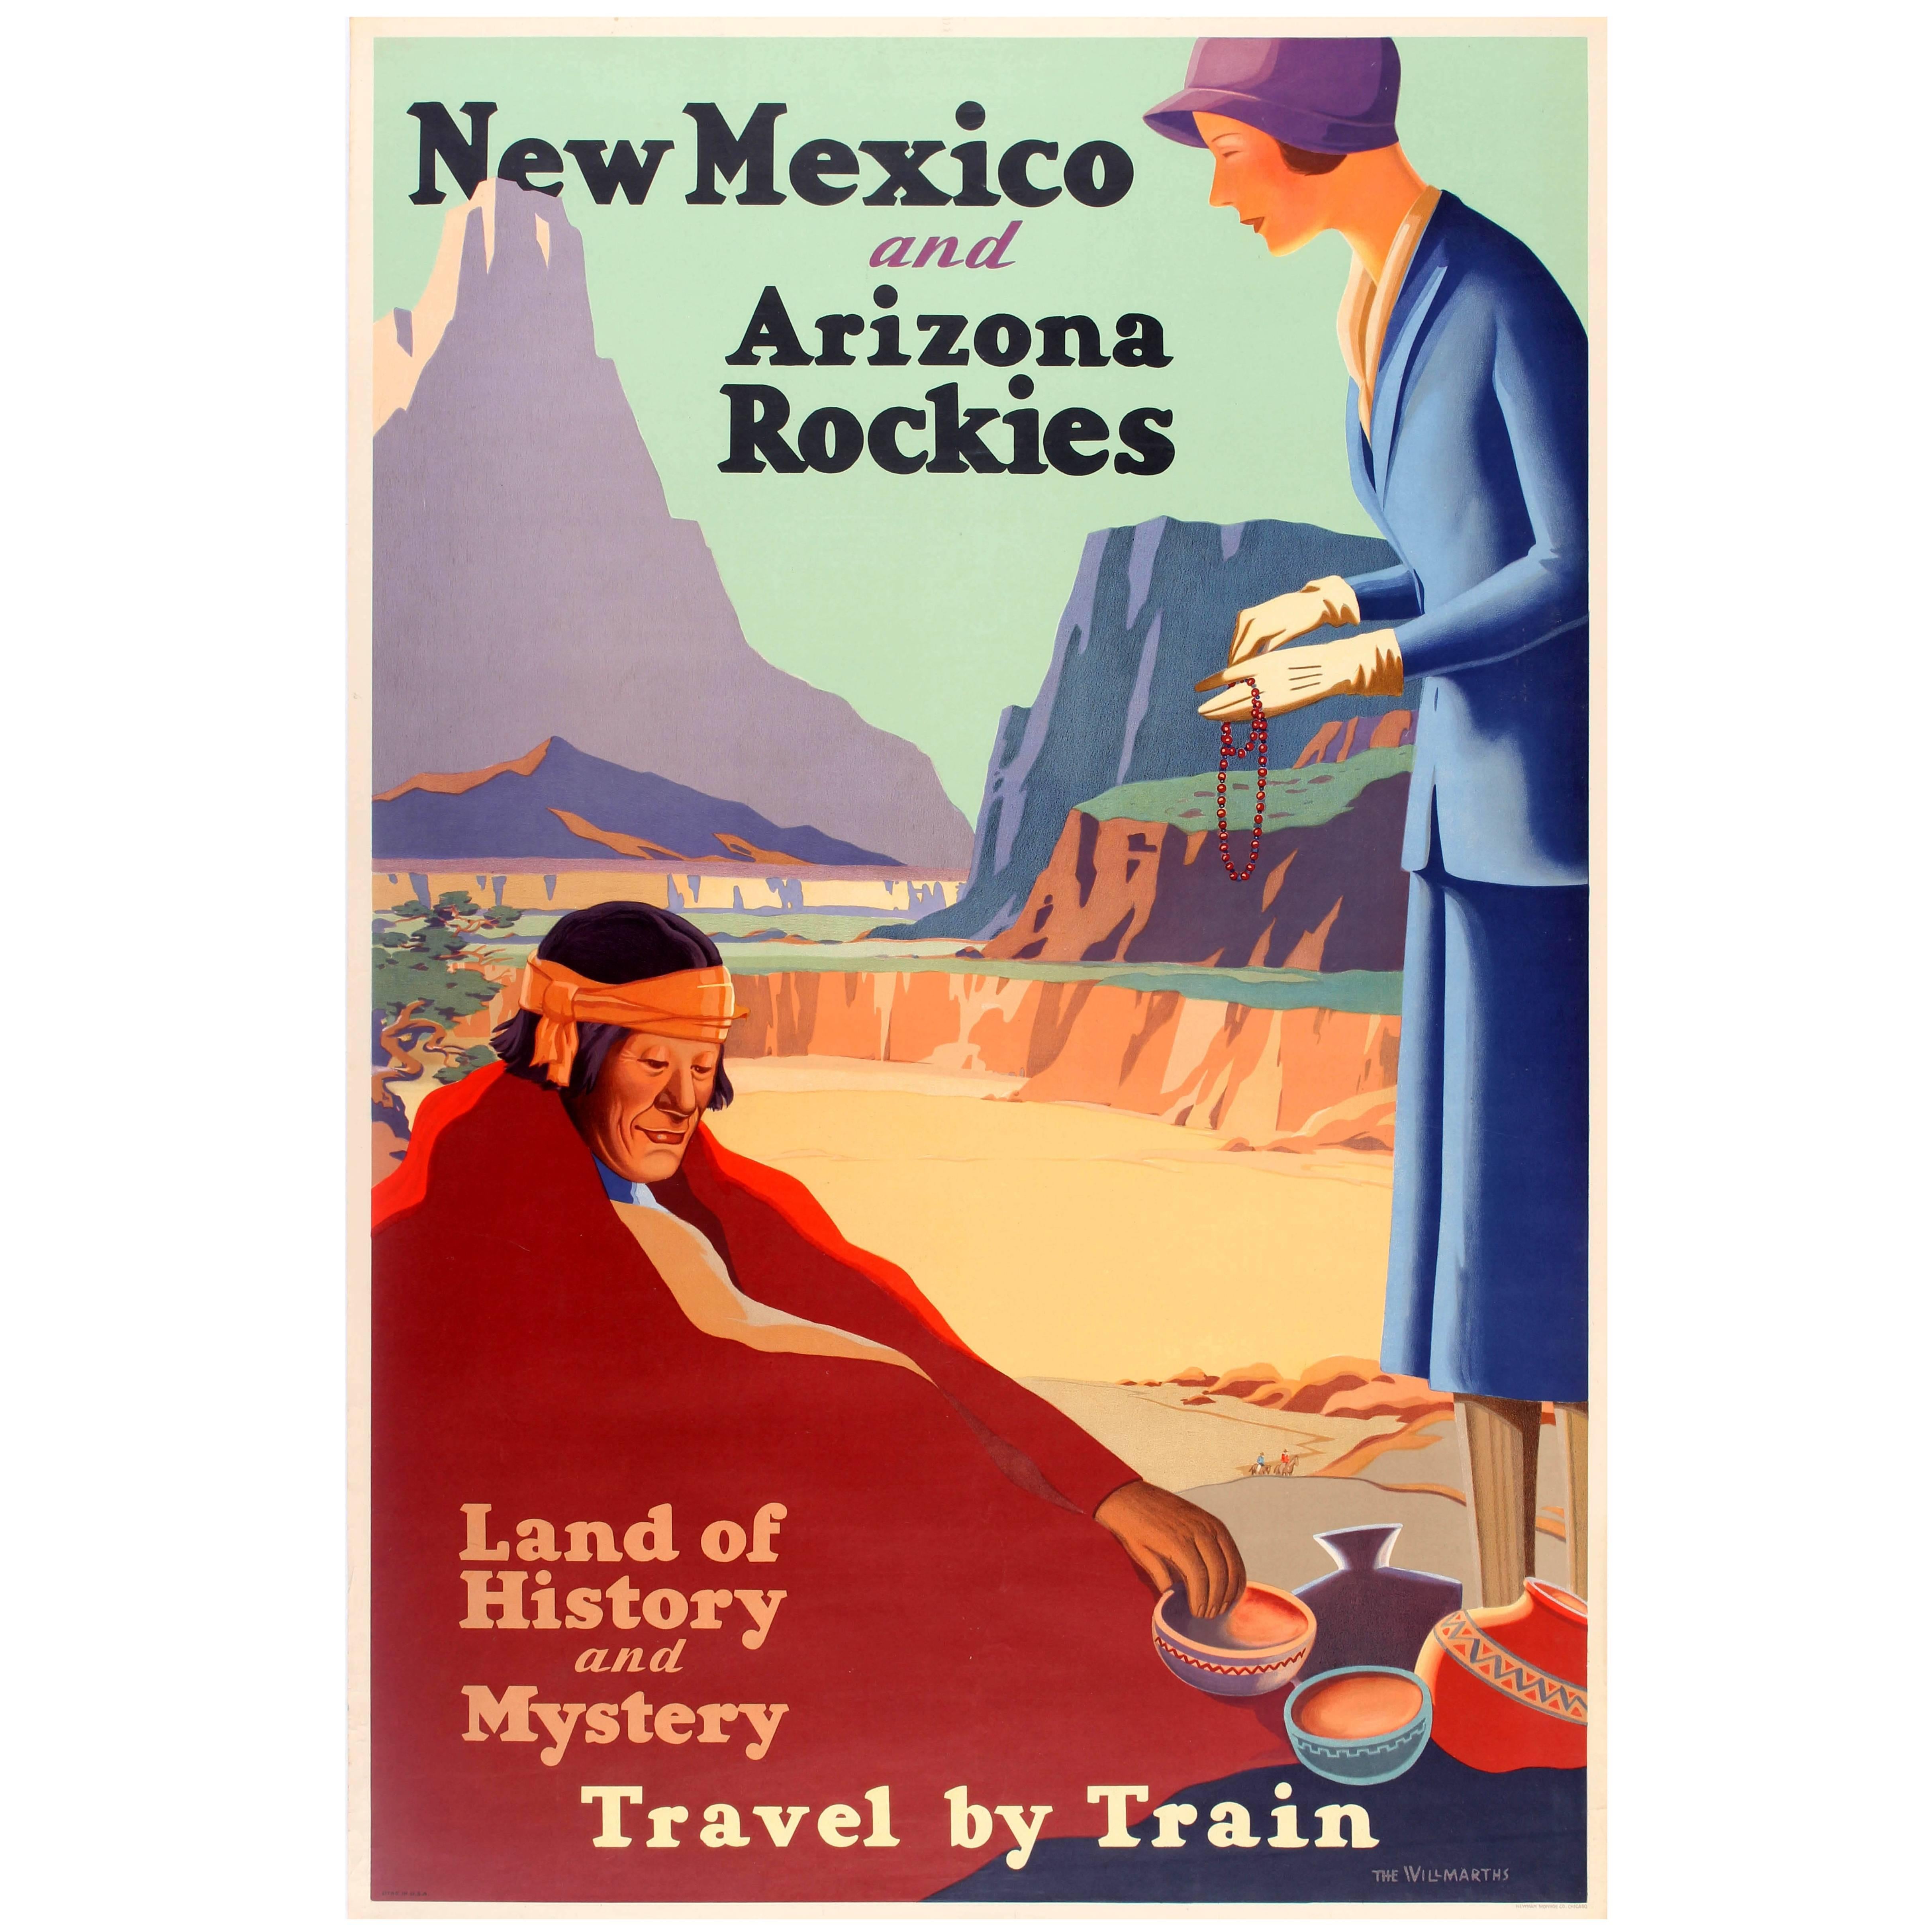 Original 1920s Travel Poster Advertising New Mexico and Arizona Rockies by Train For Sale